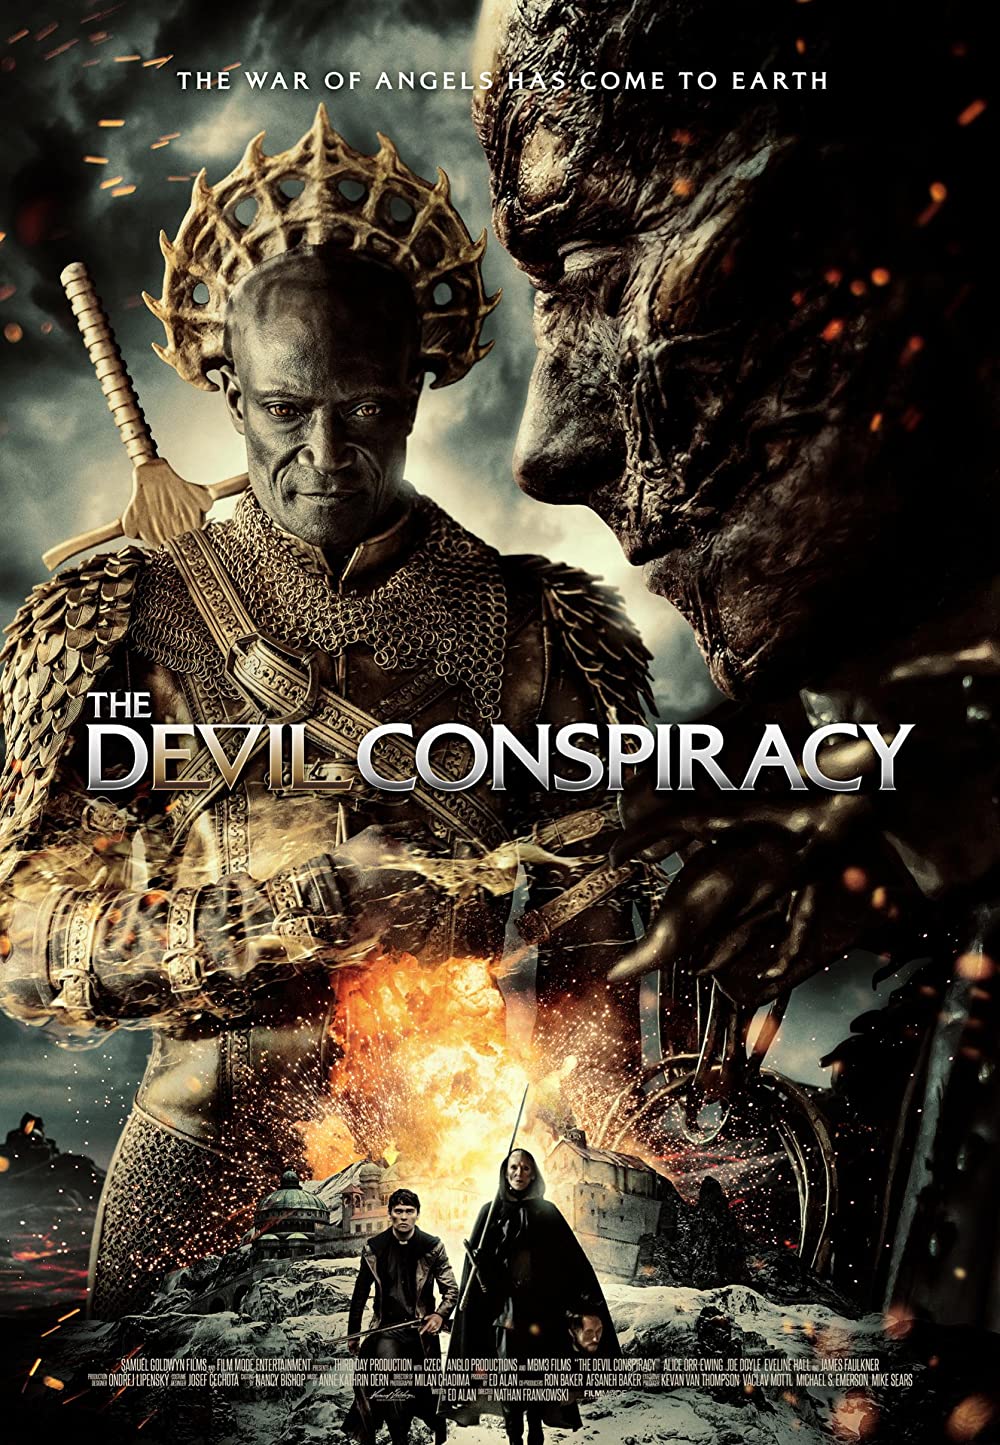 The Devil Conspiracy Movie (2022) Cast, Release Date, Story, Budget, Collection, Poster, Trailer, Review